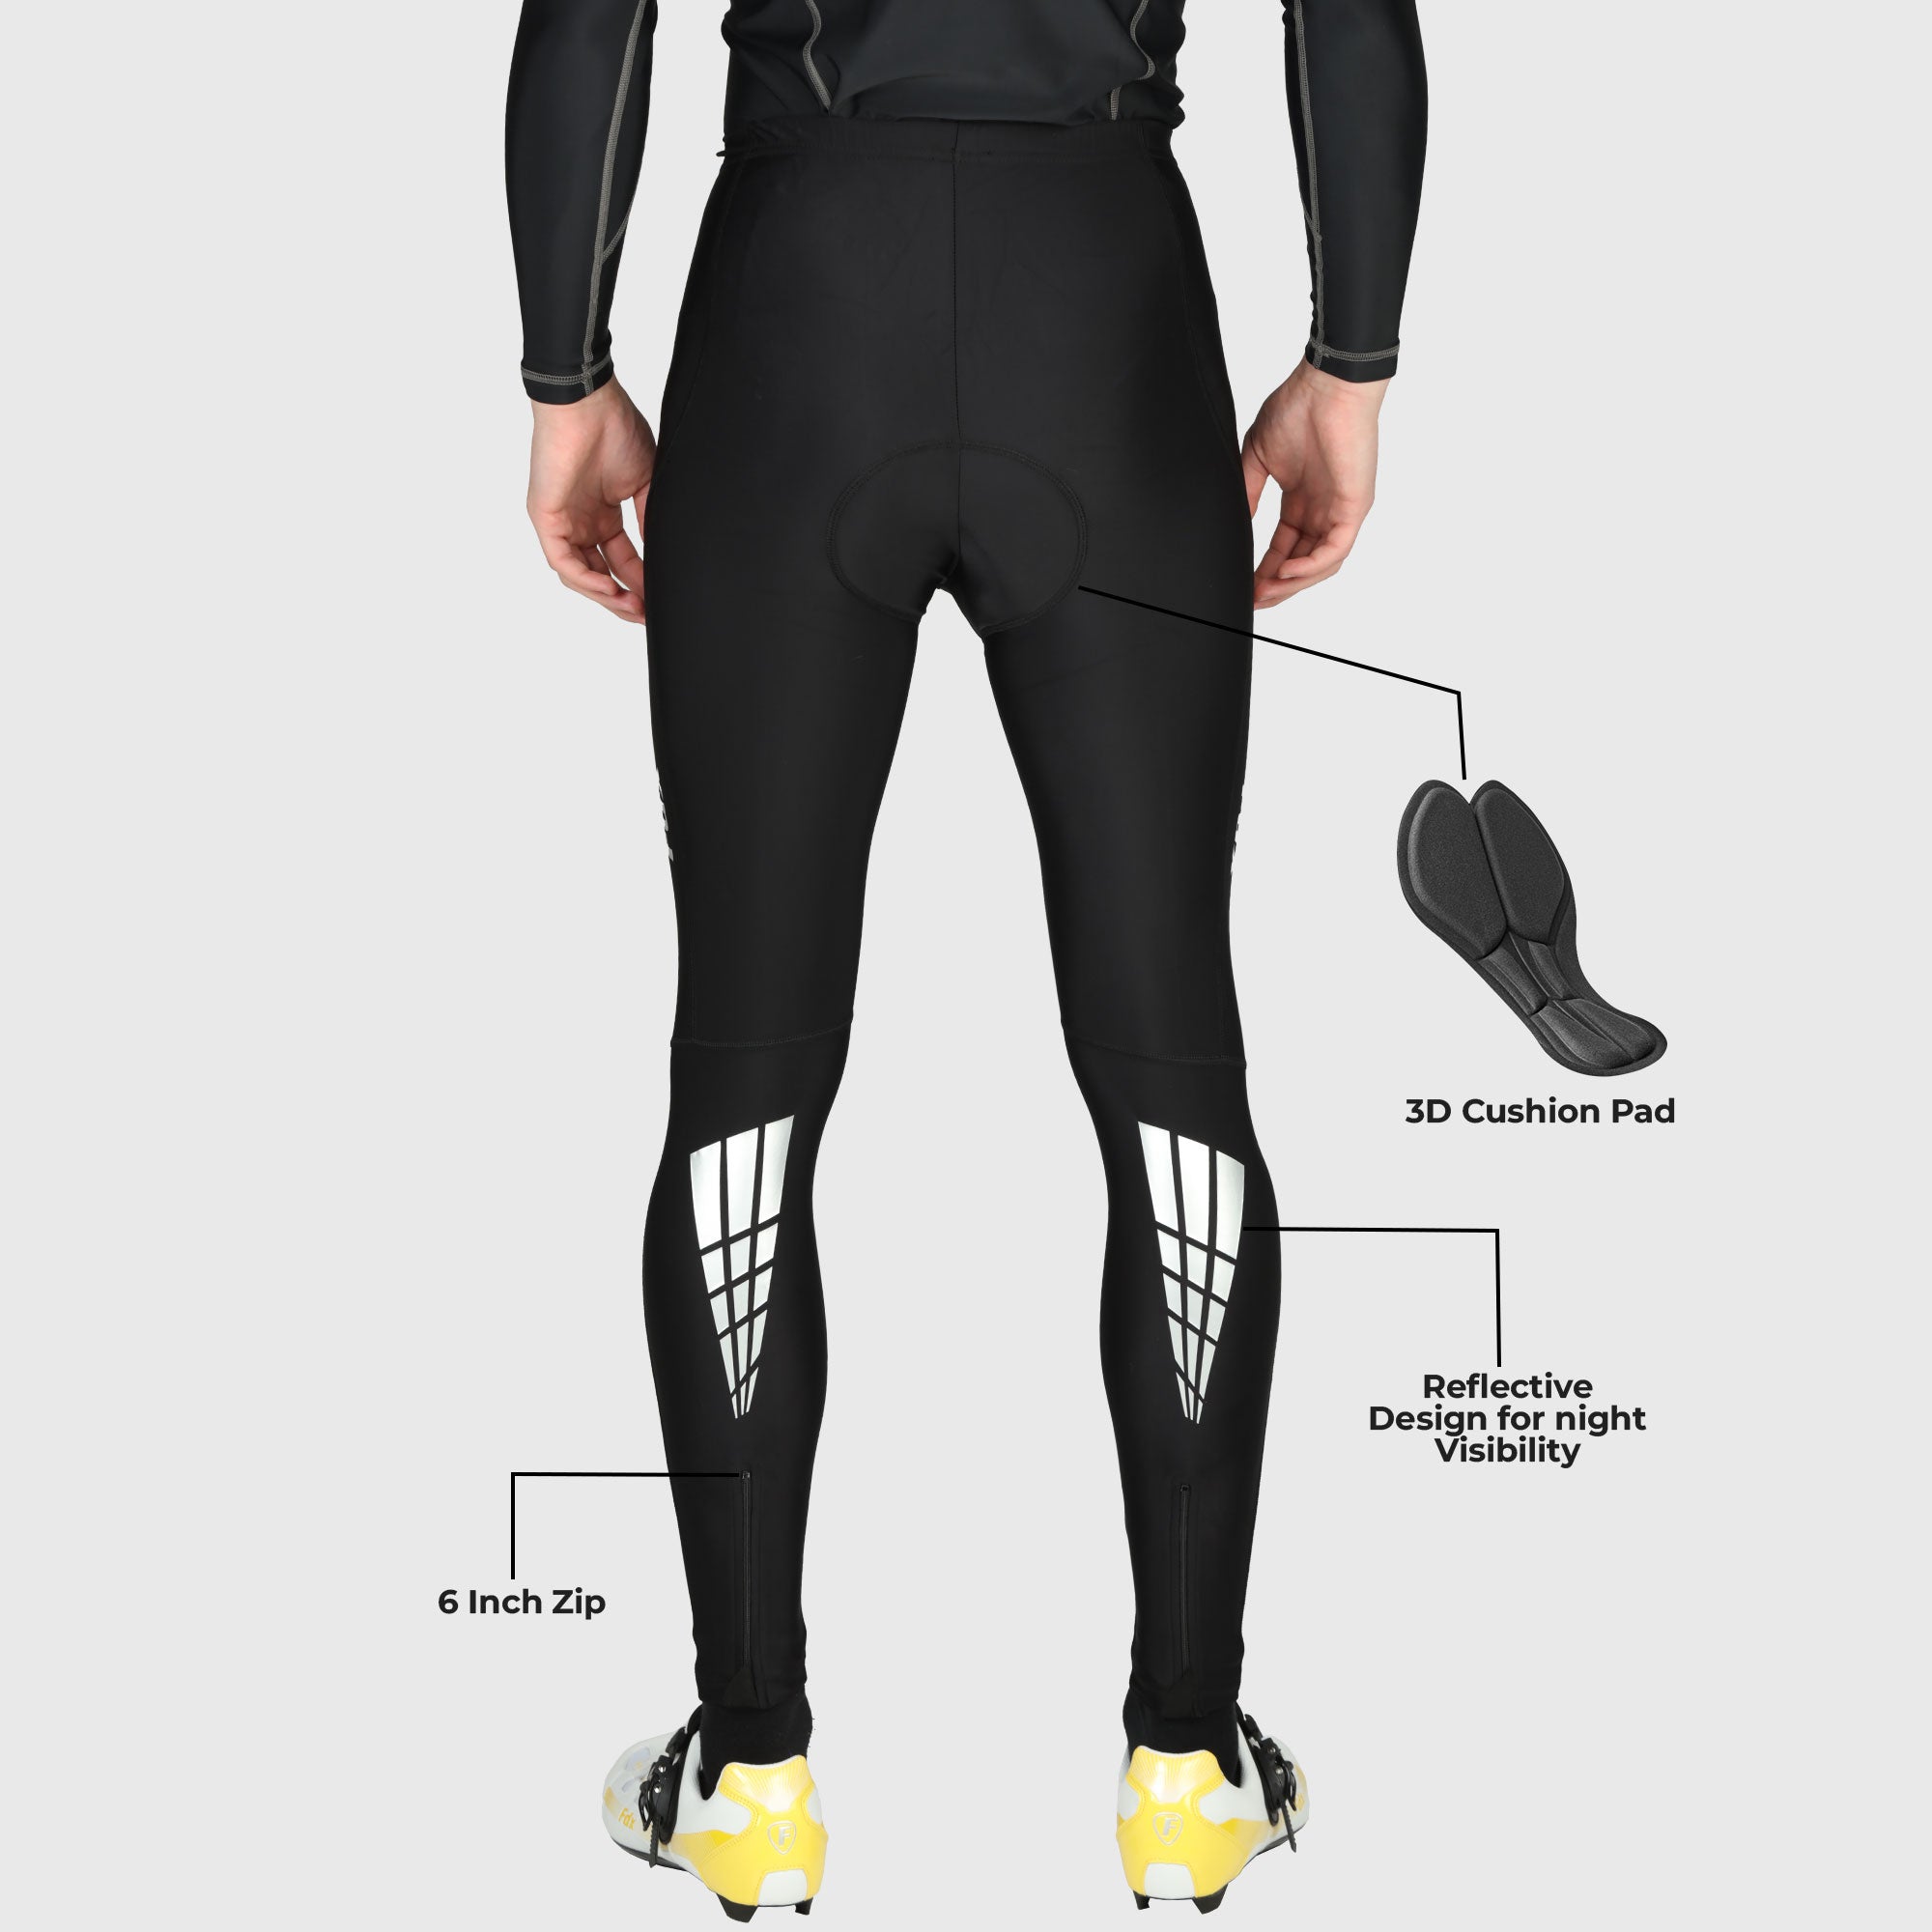 sponeed Men Cycling Pants Cyclist Leggings Padded MTB Road Bike Sportswear  Moisture Wicking Gym Man Tights US S Multi : Amazon.in: Clothing &  Accessories